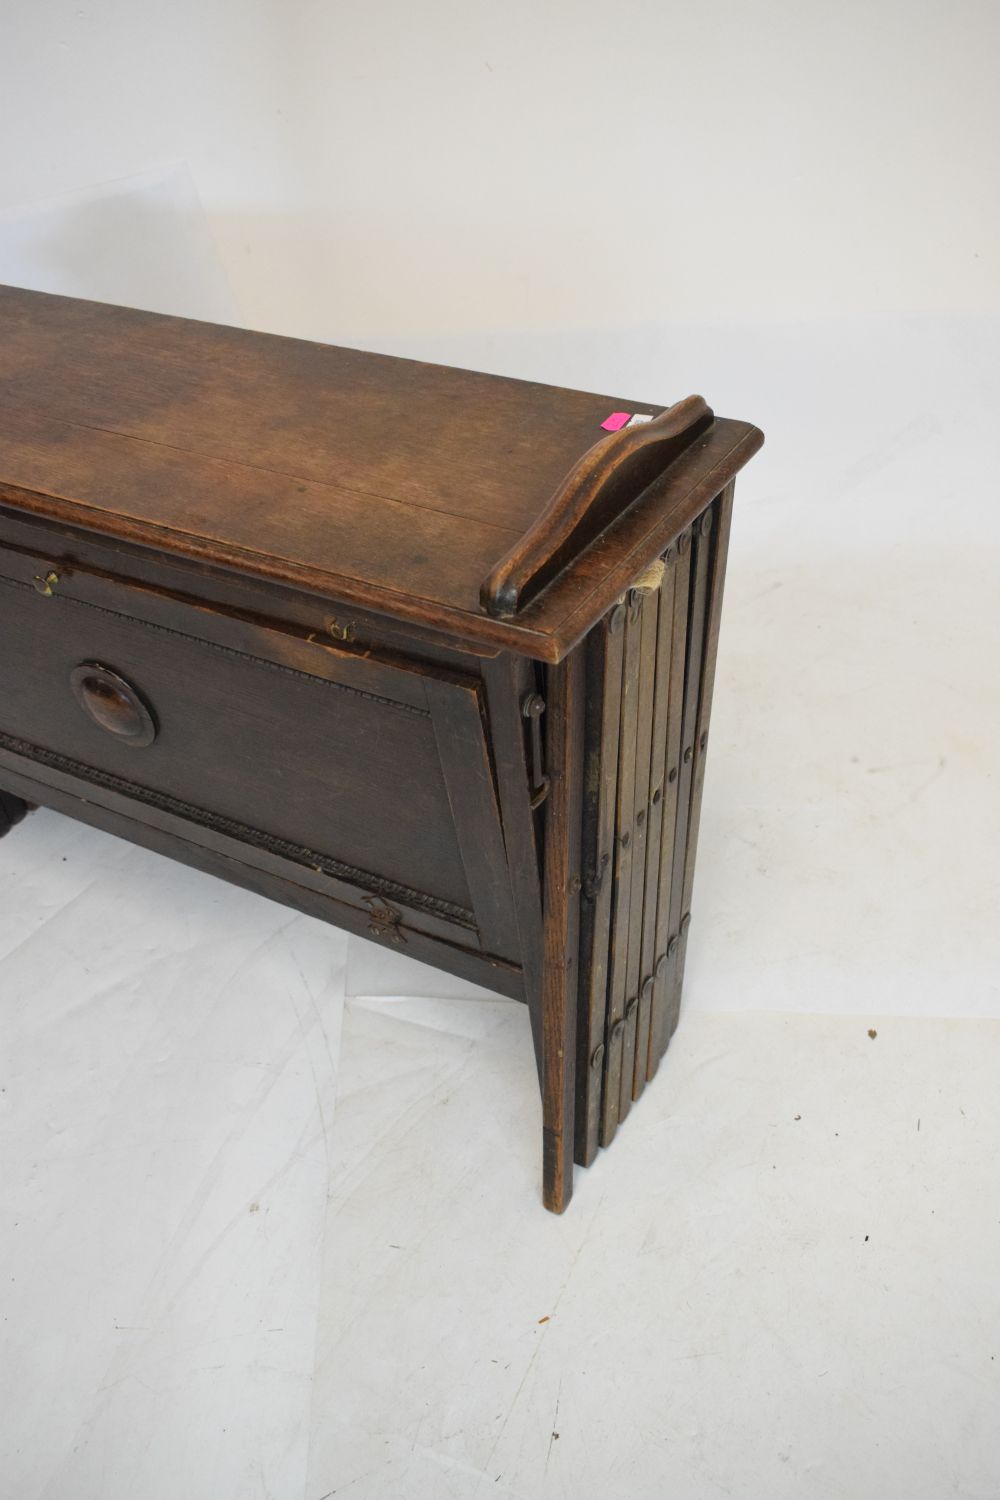 Early 20th Century oak framed concertina campaign bed - Image 2 of 7